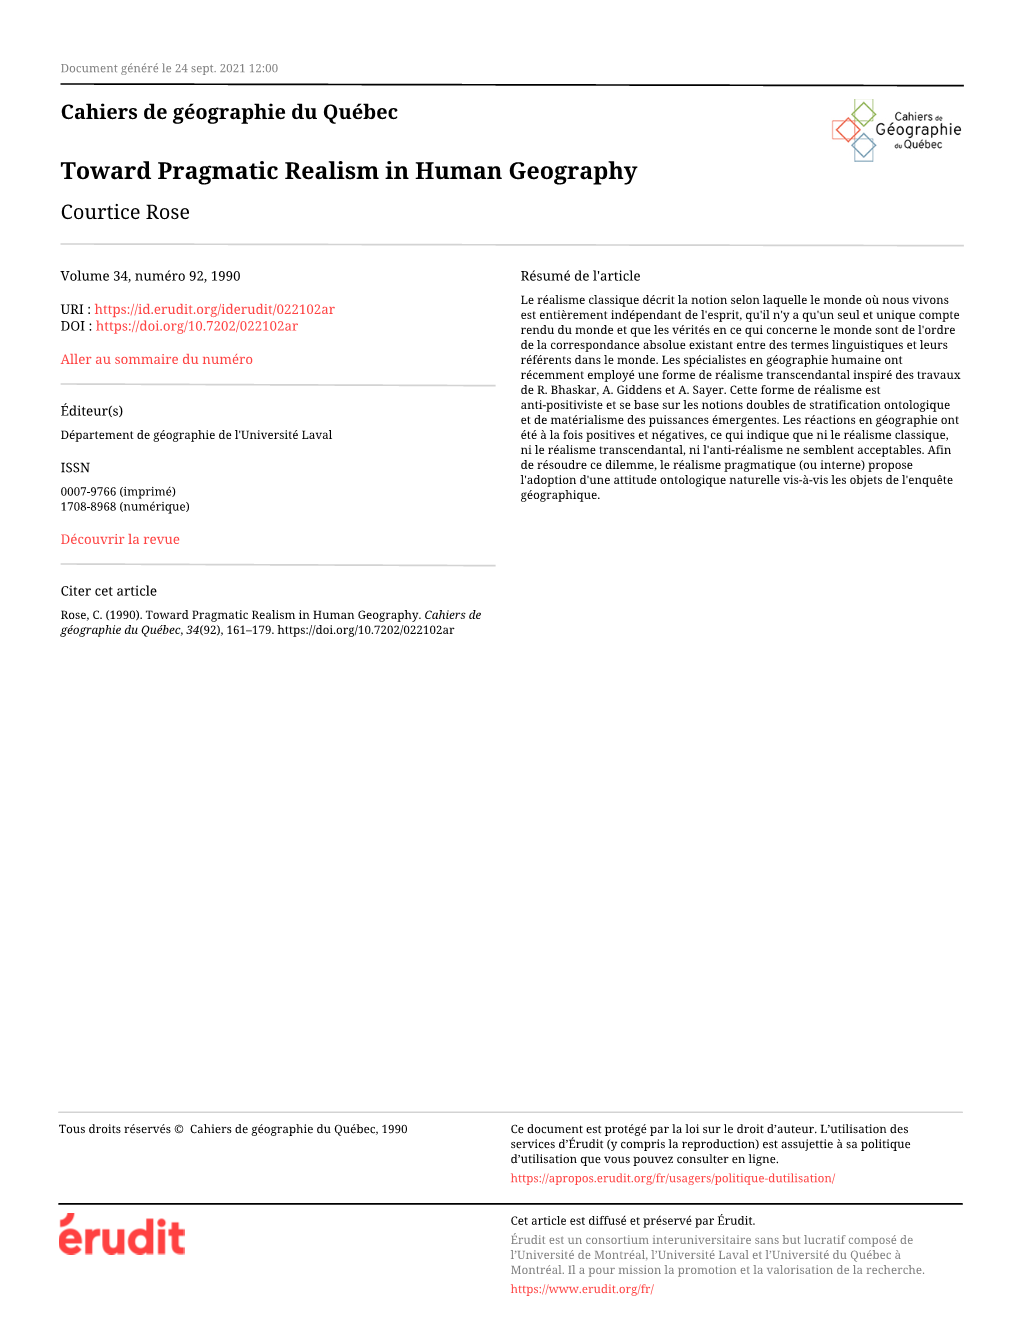 Toward Pragmatic Realism in Human Geography Courtice Rose